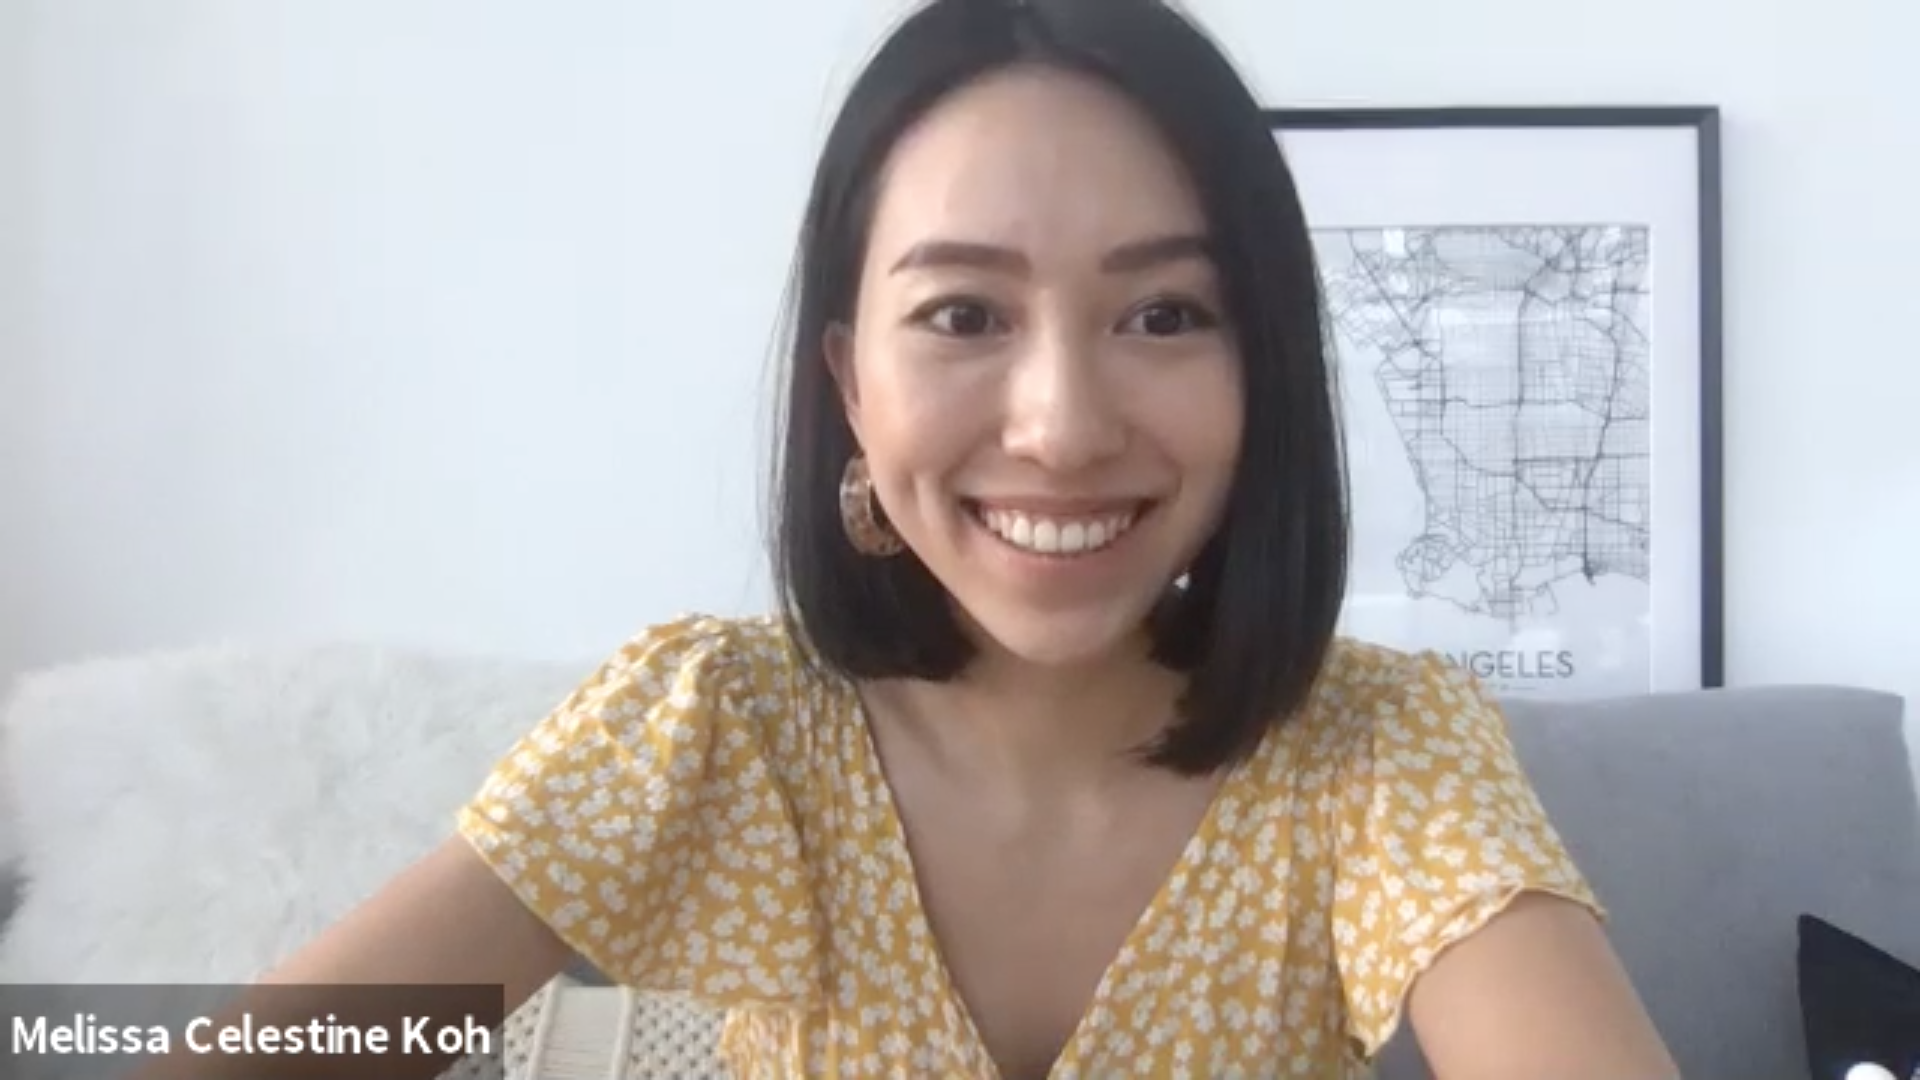 Melissa Celestine Koh, Singaporean lifestyle blogger and YouTuber, said she has a simple three-step skincare routine. She added that consistency is key to ensure her skin is at its best all the time.